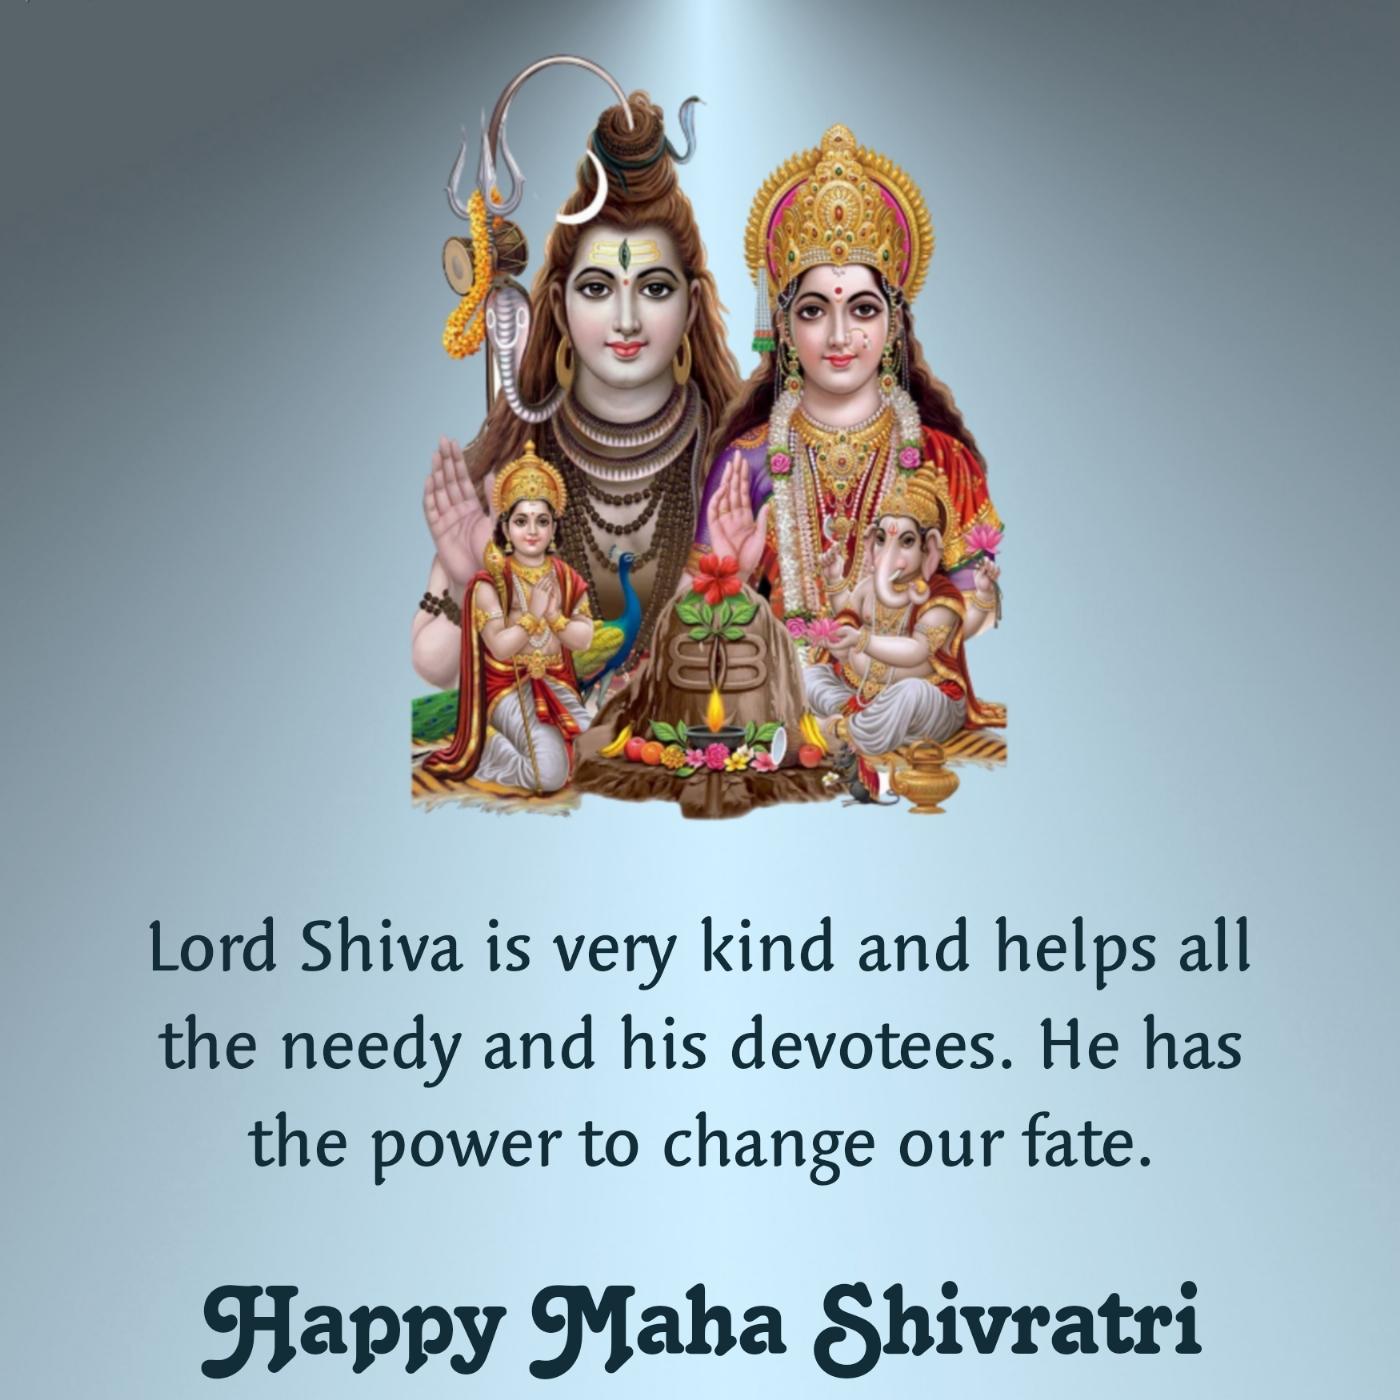  Lord Shiva is very kind and helps all the needy and his devotees